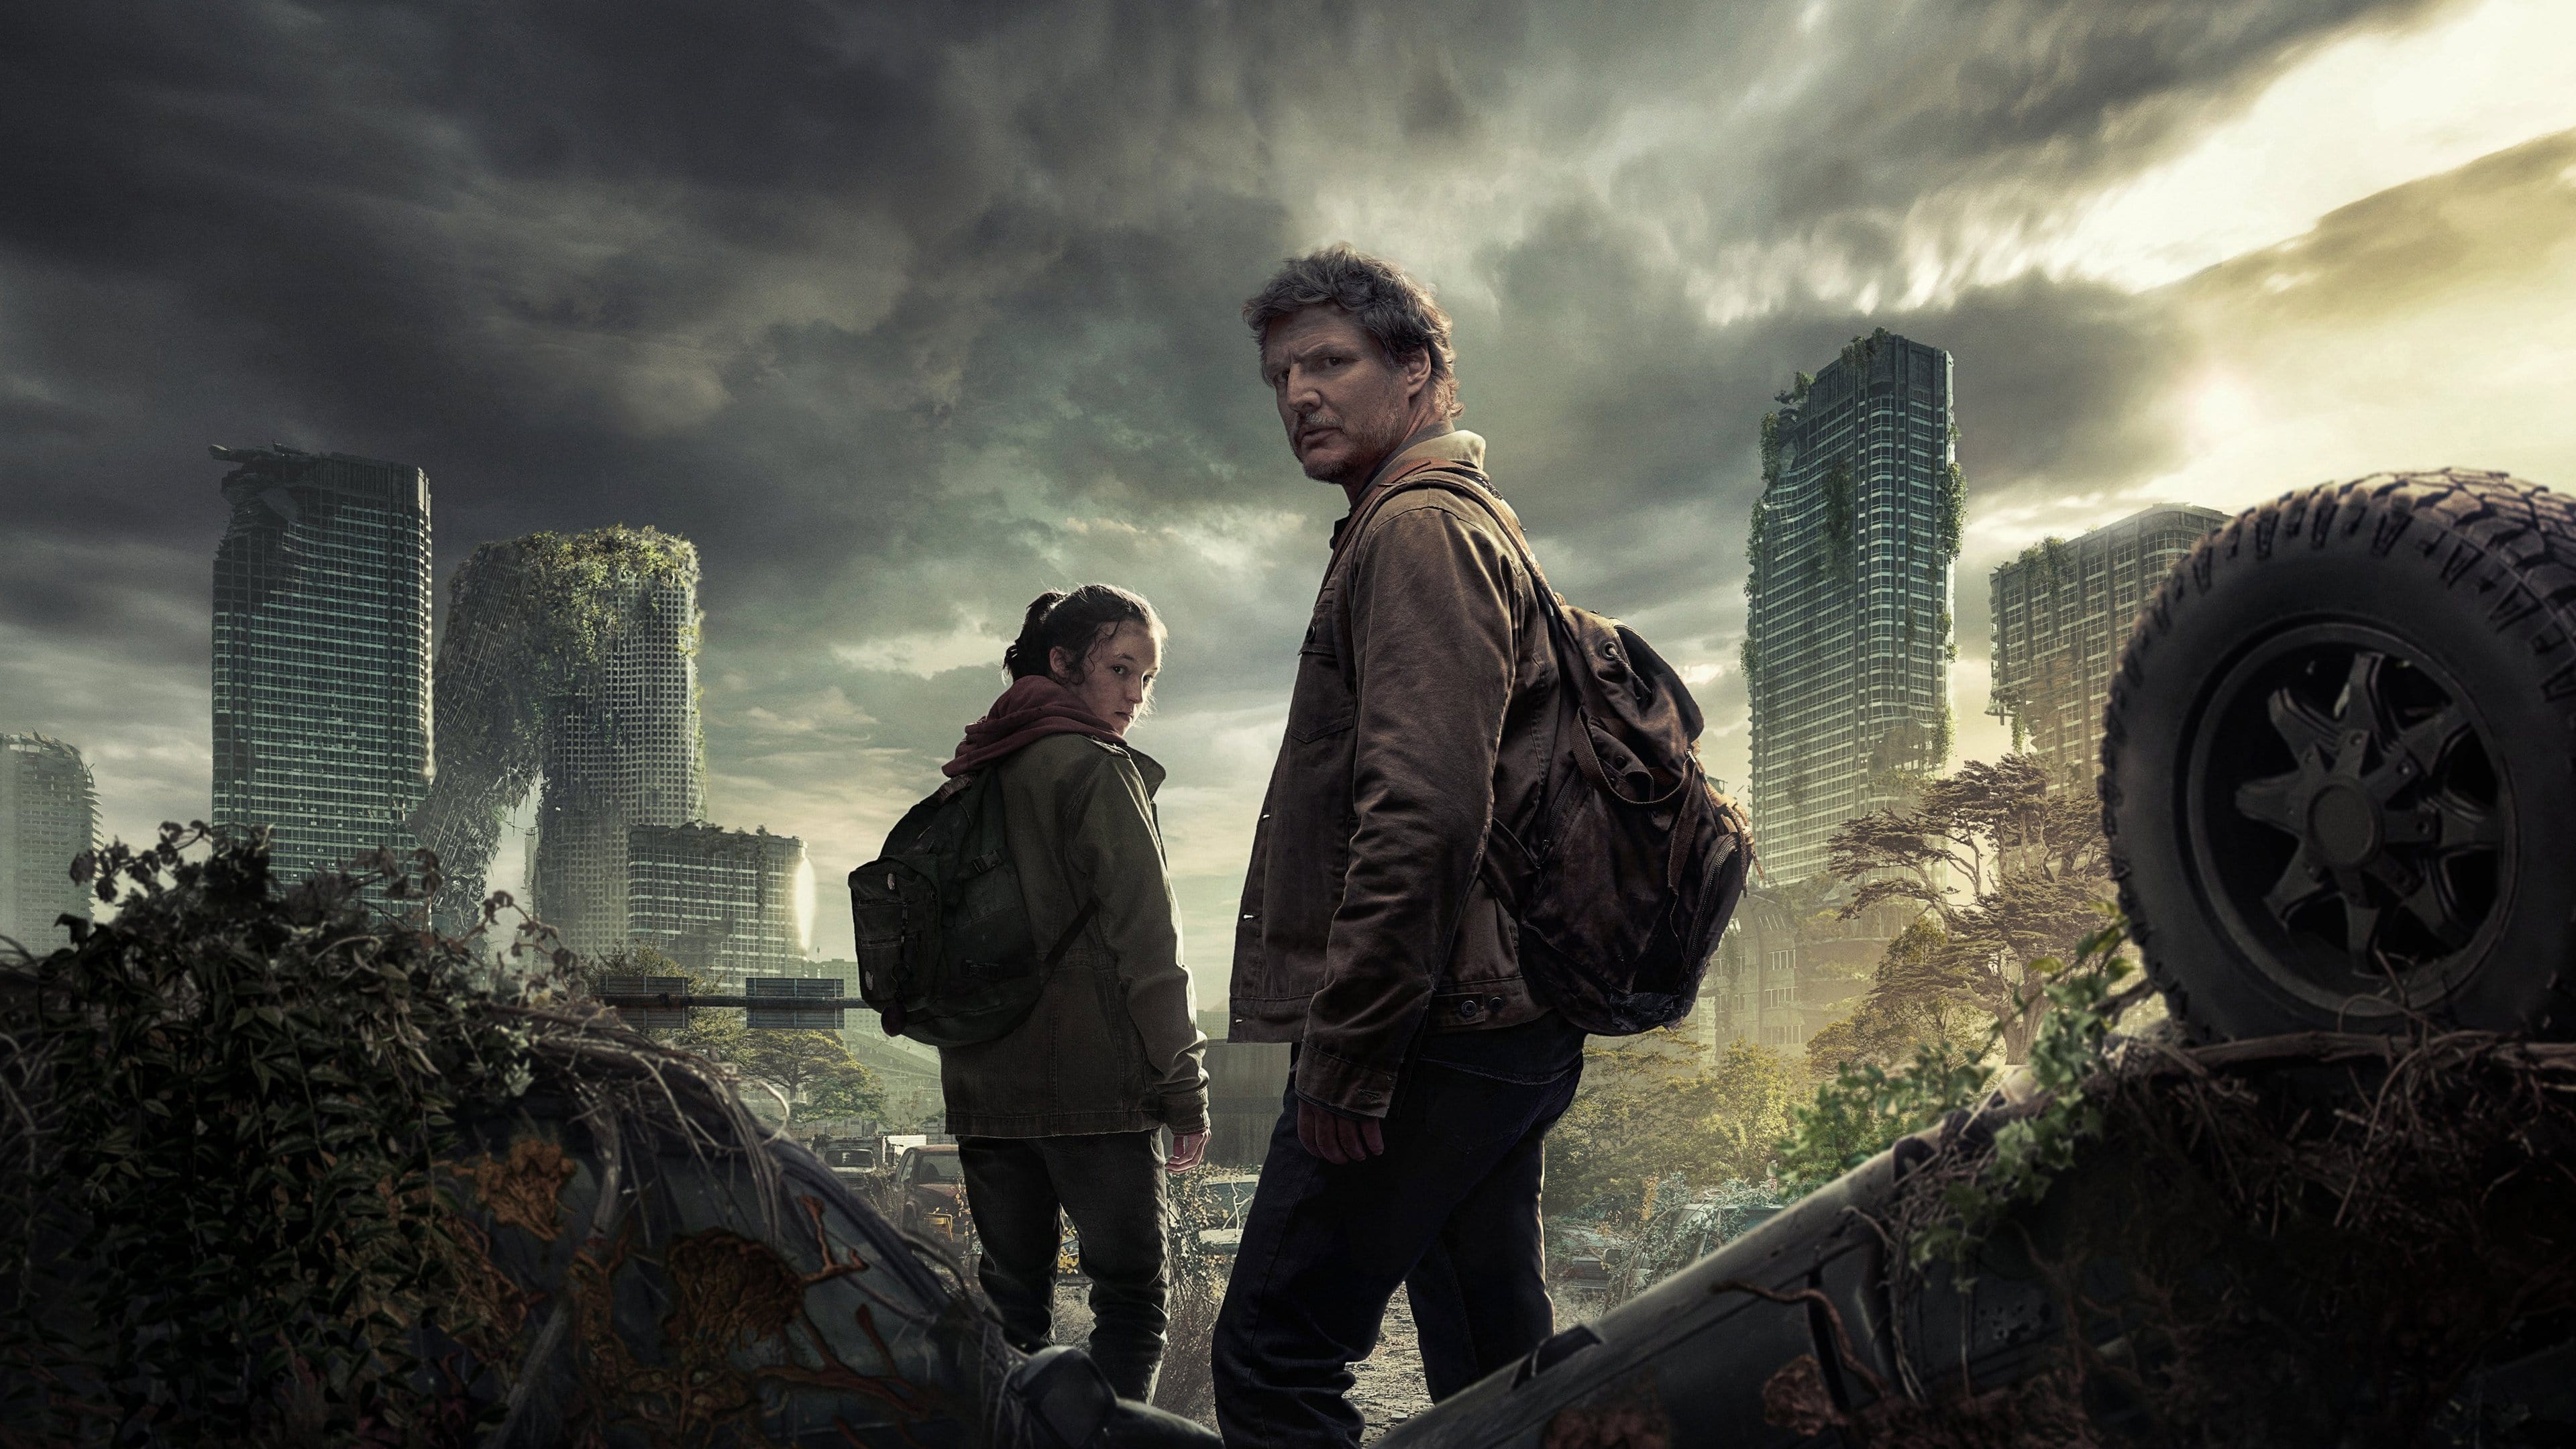 HBO’s ‘The Last of Us’ gets a warm welcome with 4.7M U.S. viewers